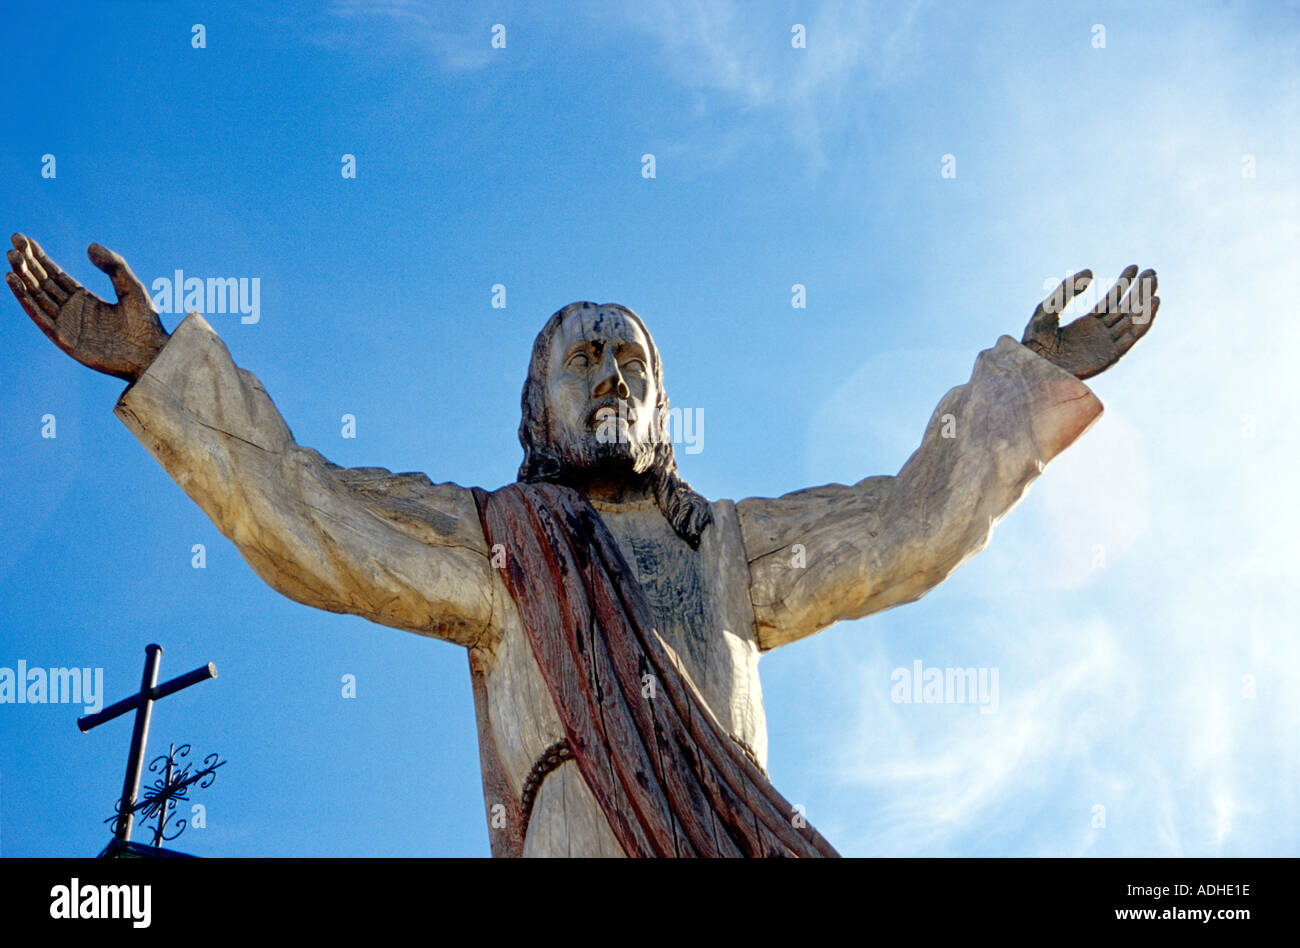 Wooden Carving of Jesus Christ at Hill of Crosses Siauliai Lithuania Stock Image